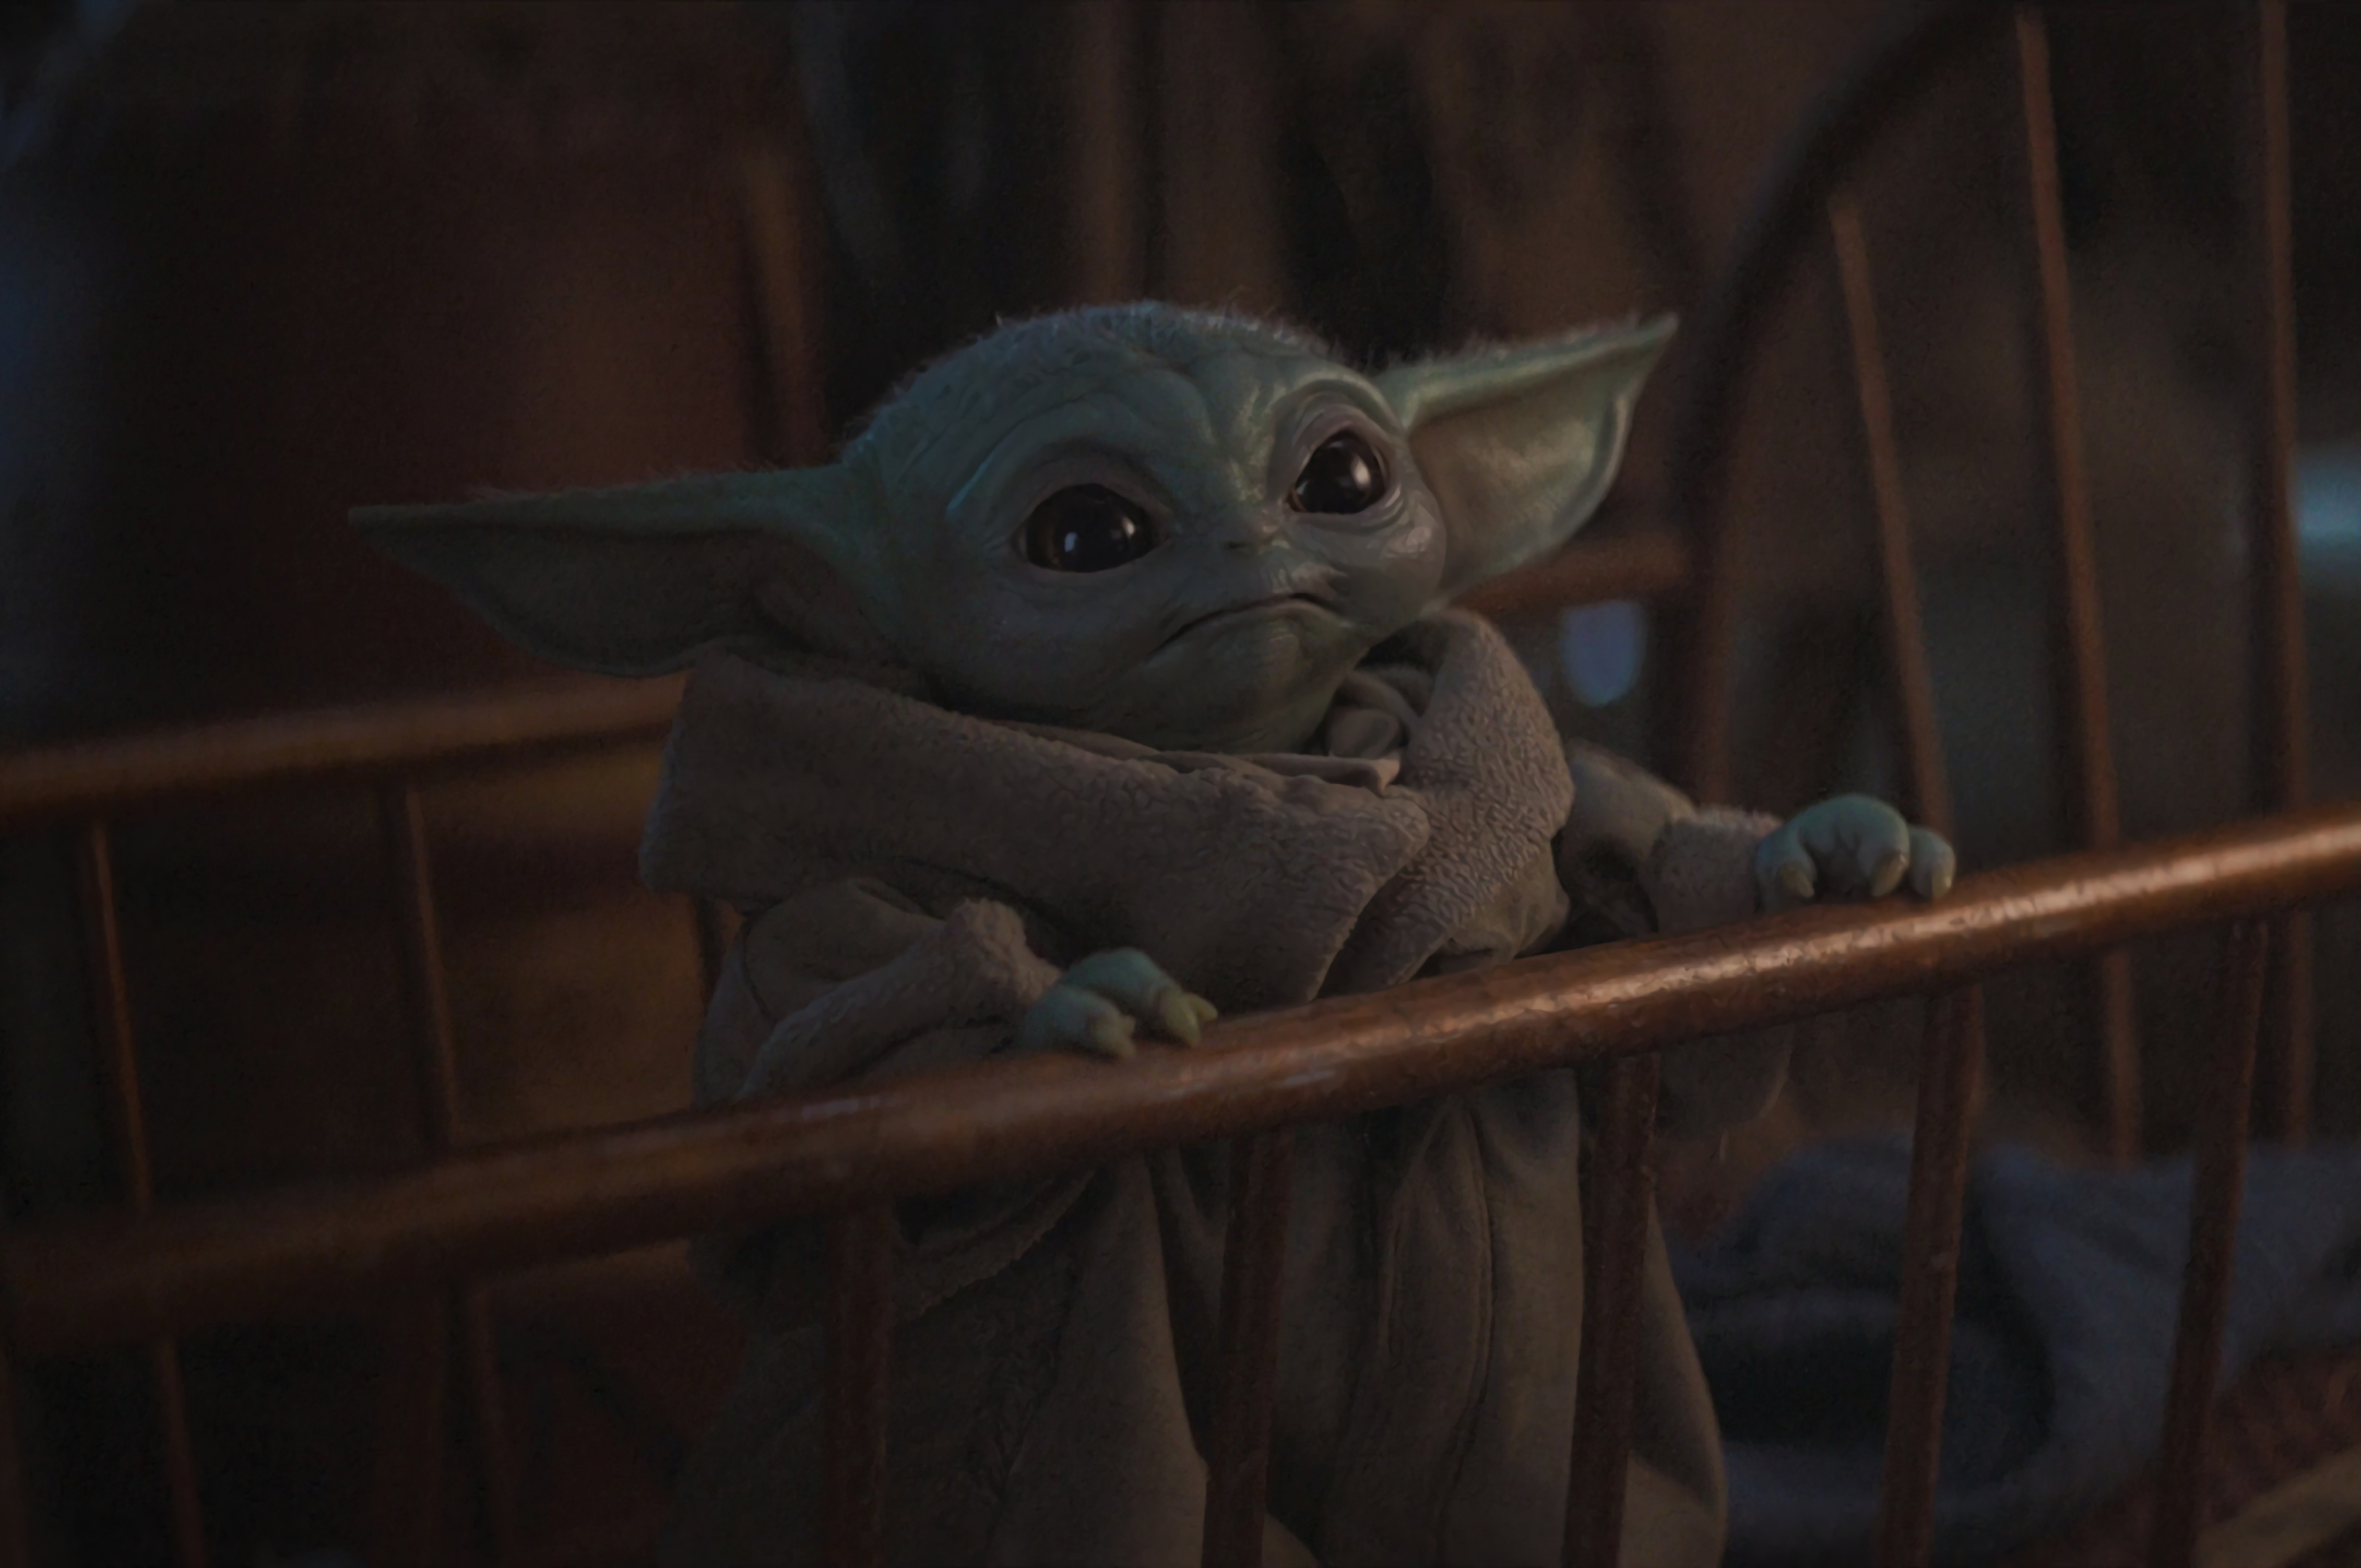 2560x1700 Cute Baby Yoda From Mandalorian Chromebook Pixel Wallpaper Hd Tv Series 4k Wallpapers Images Photos And Background Wallpapers Den